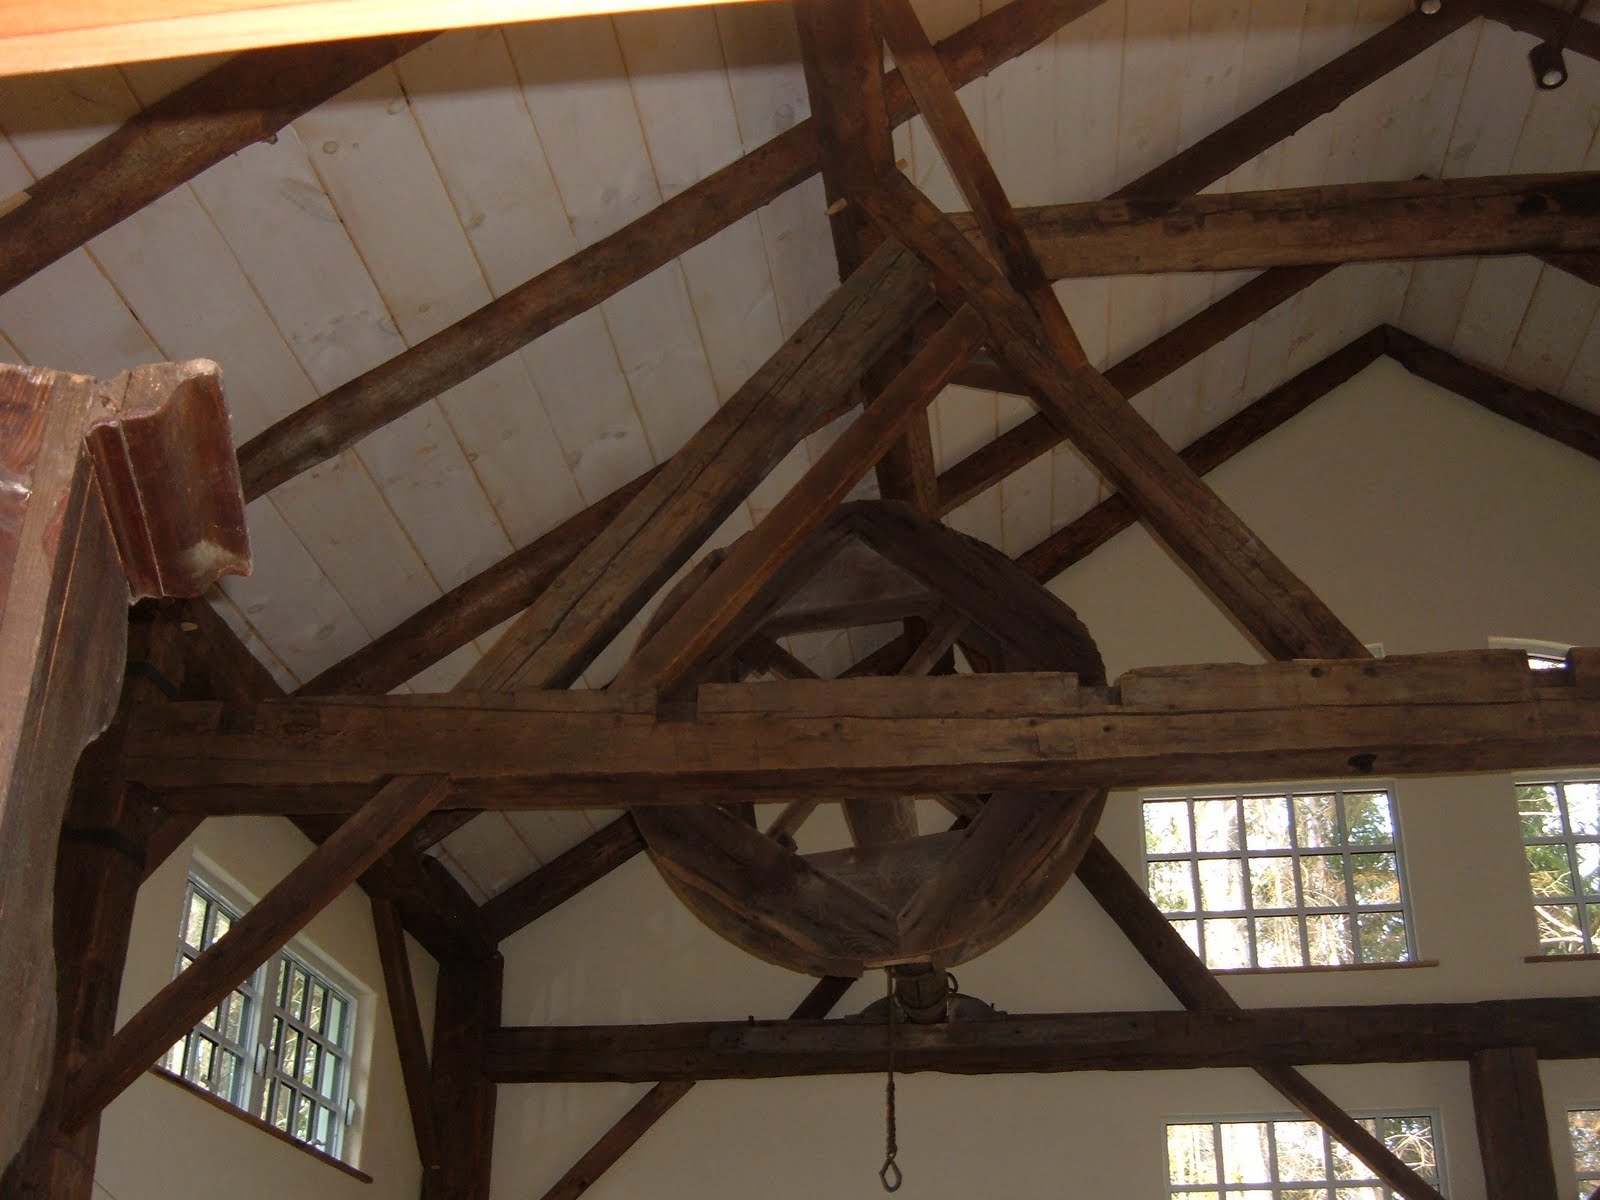 The carcass wheel was an original feature of this barn.